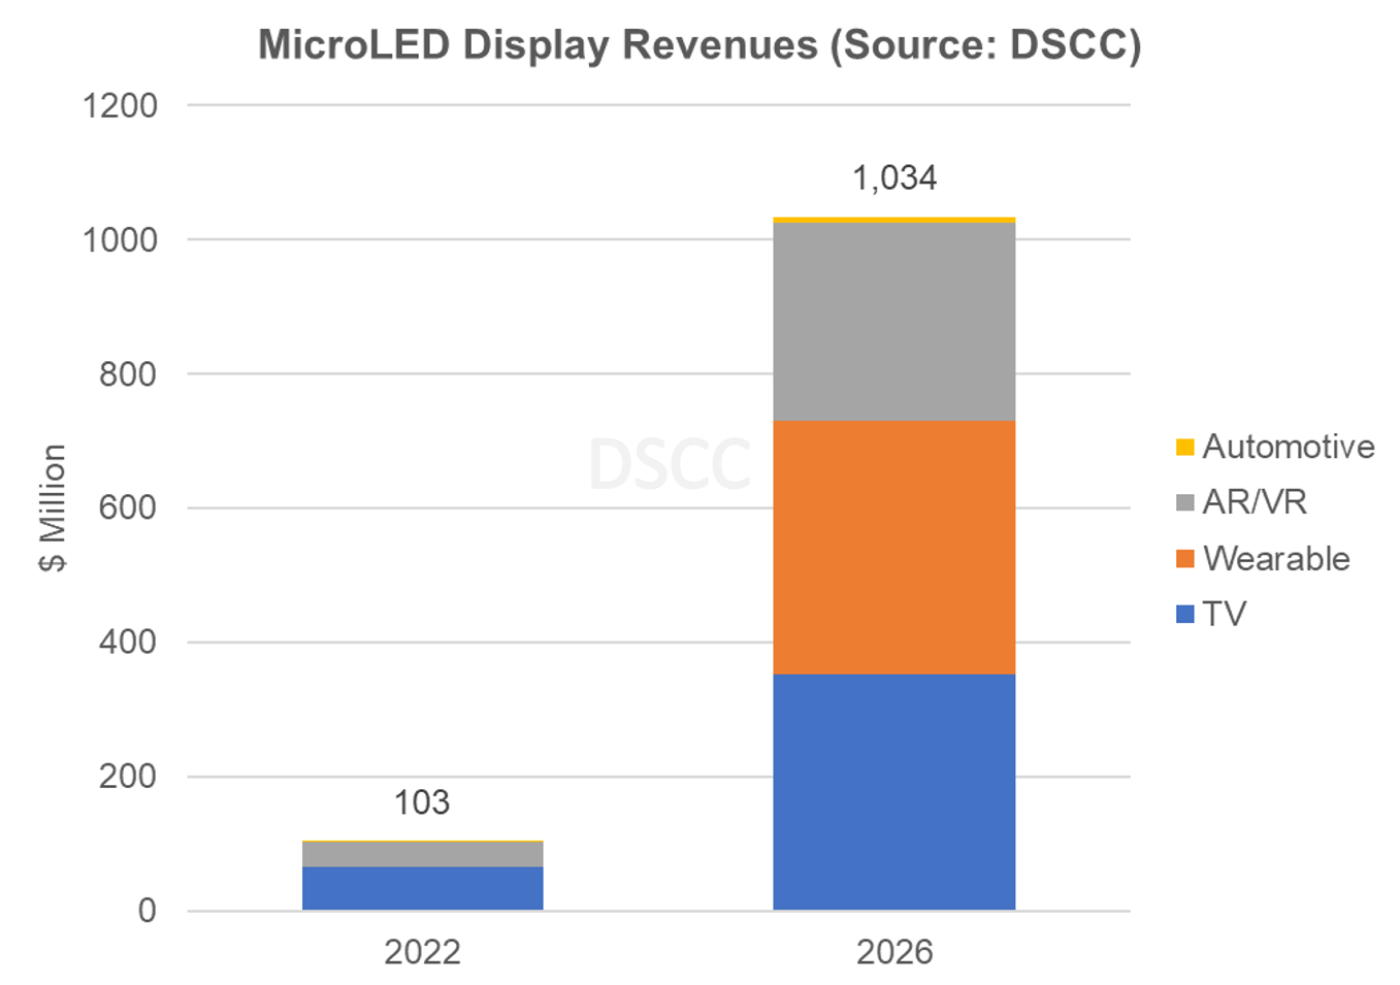 Source: DSCC’s MicroLED Display Technology and Market Outlook Report